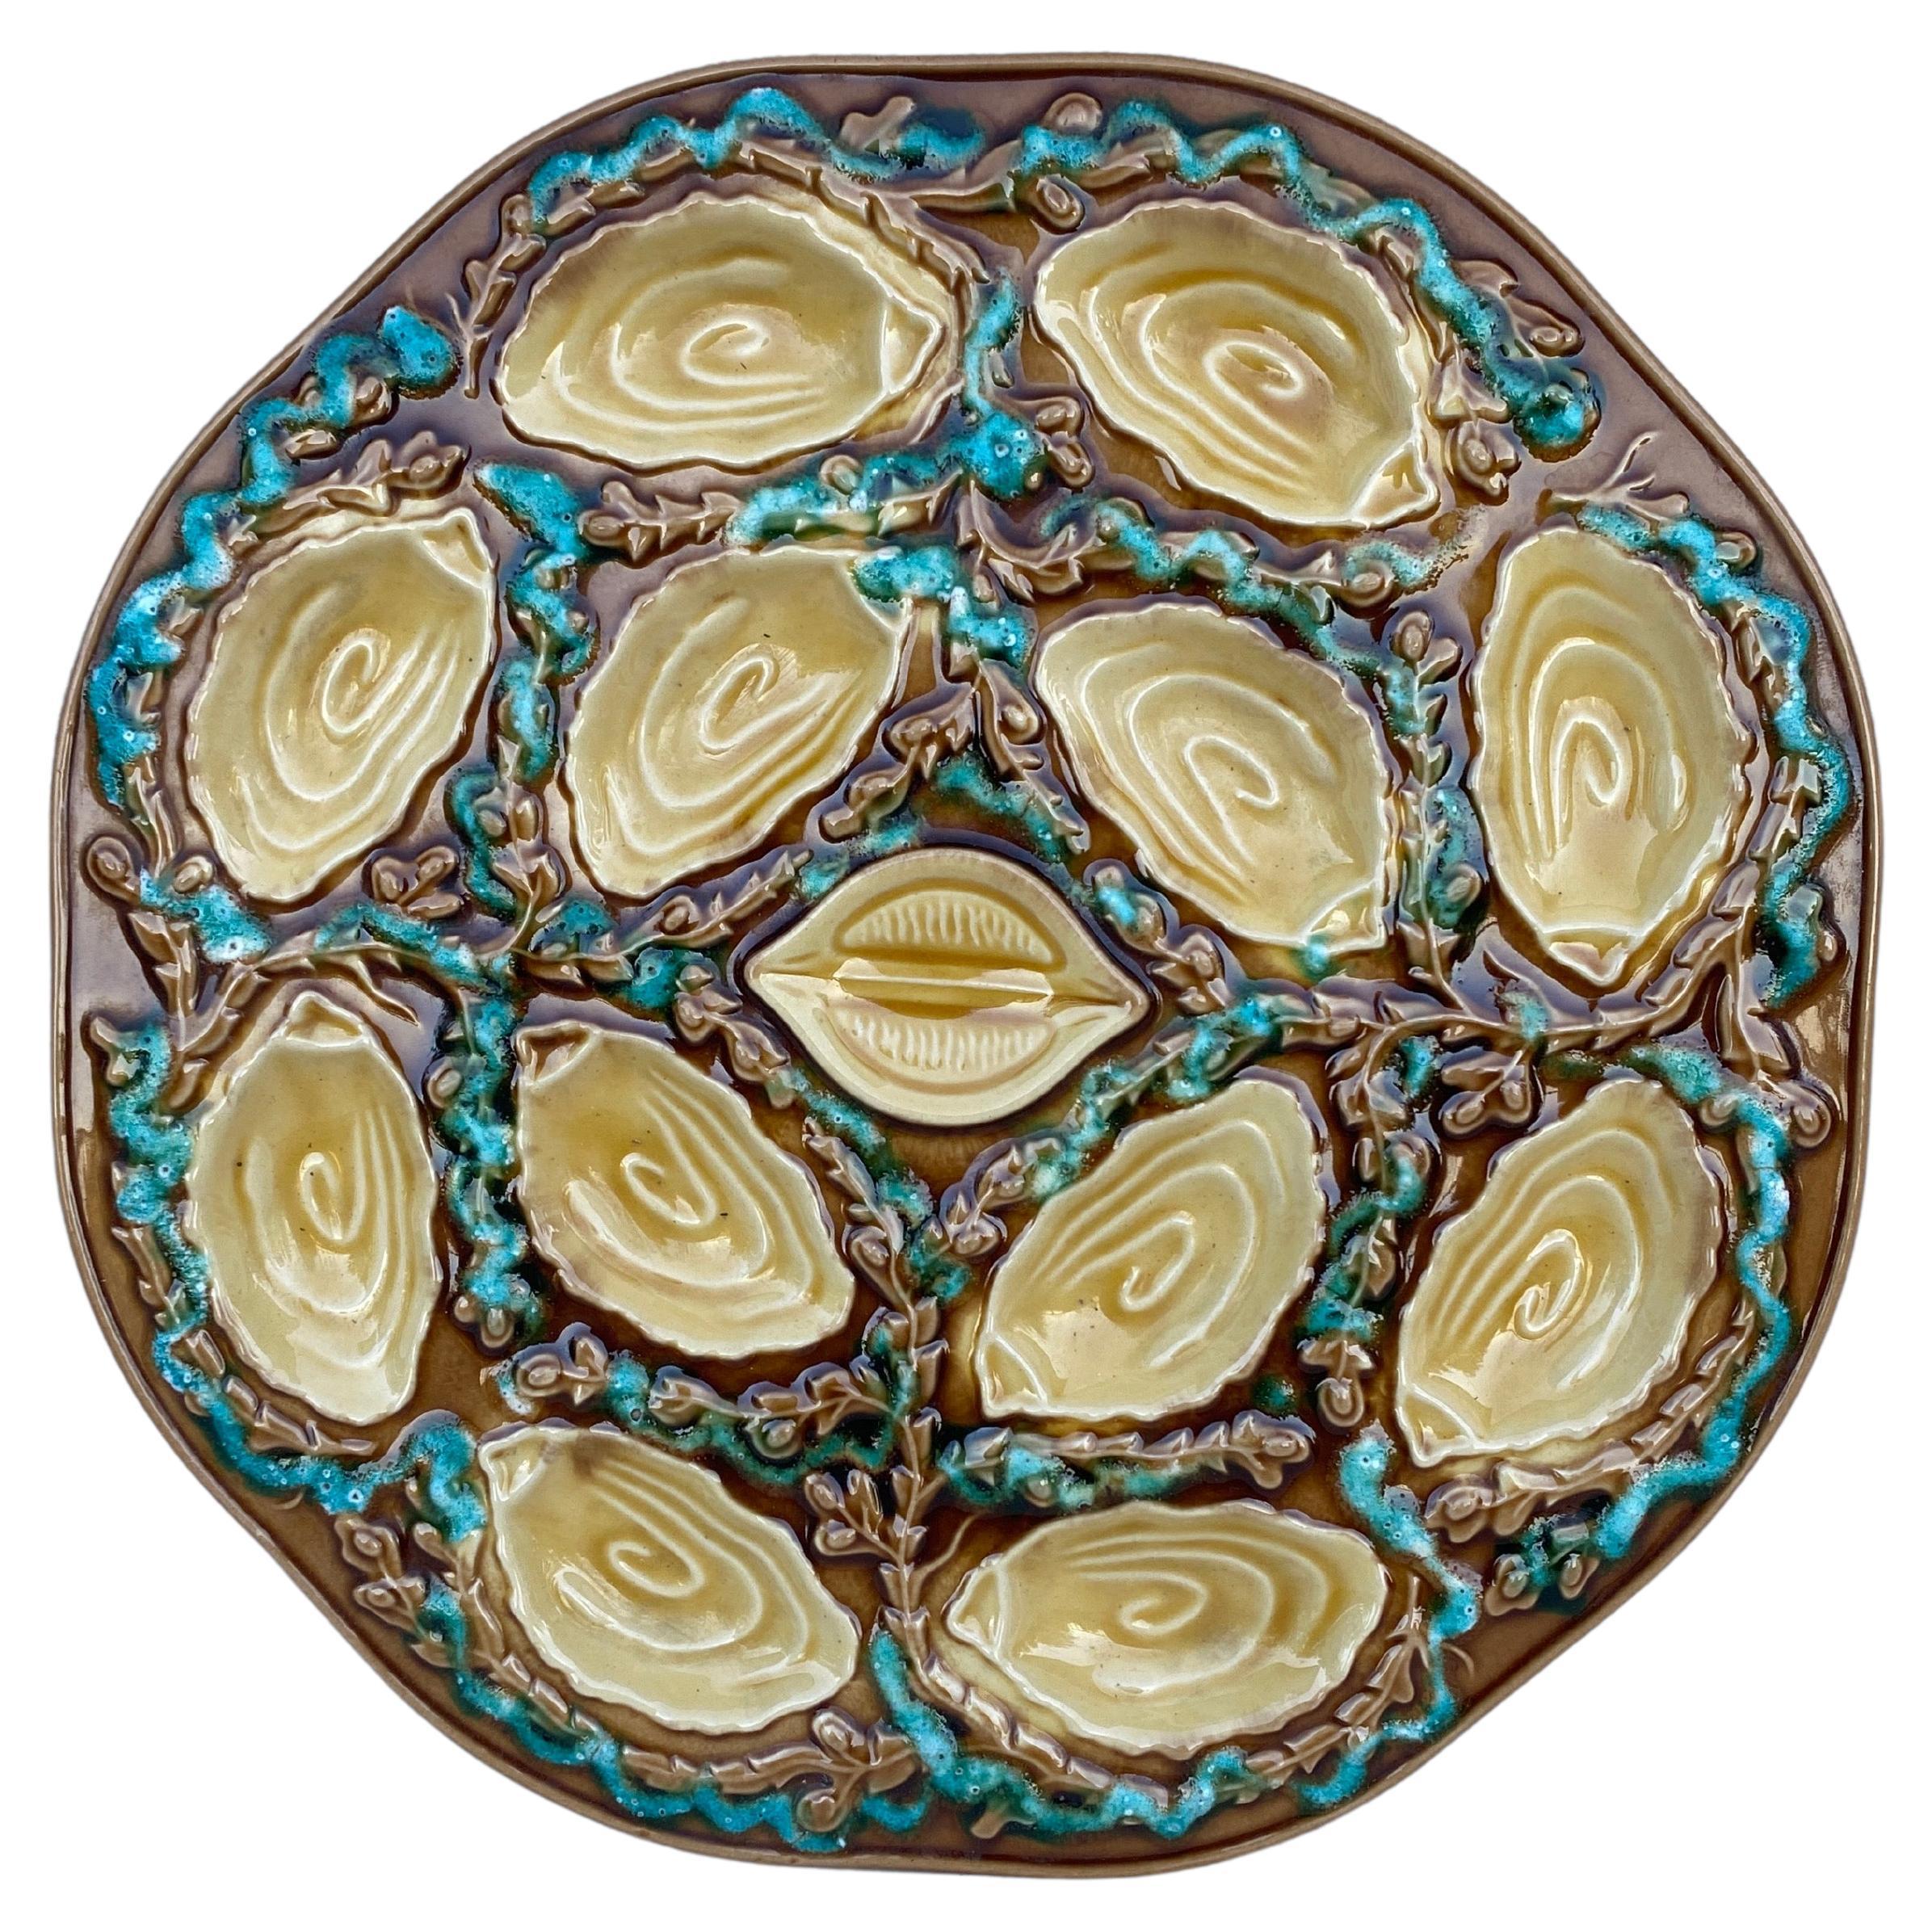 Large Majolica Oyster Platter Vallauris circa 1950.
14.5 inches diameter.